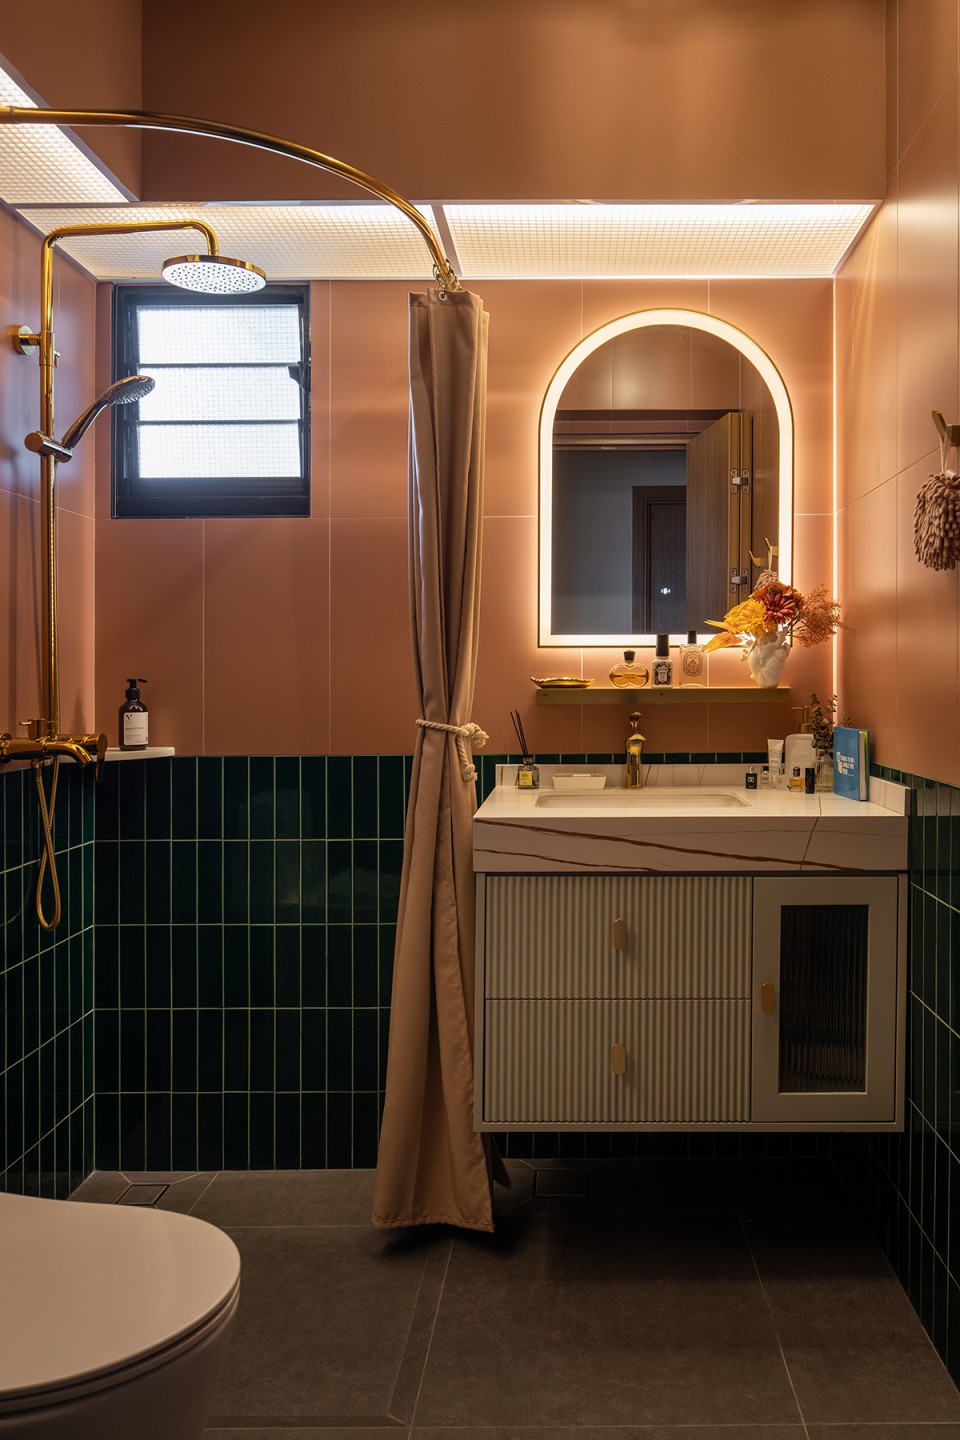 squarerooms authors interior & styling interior design home hdb 4 room bto renovation project bidadari wes anderson retro inspired style mid century modern look bathroom pink green curved shower curtain